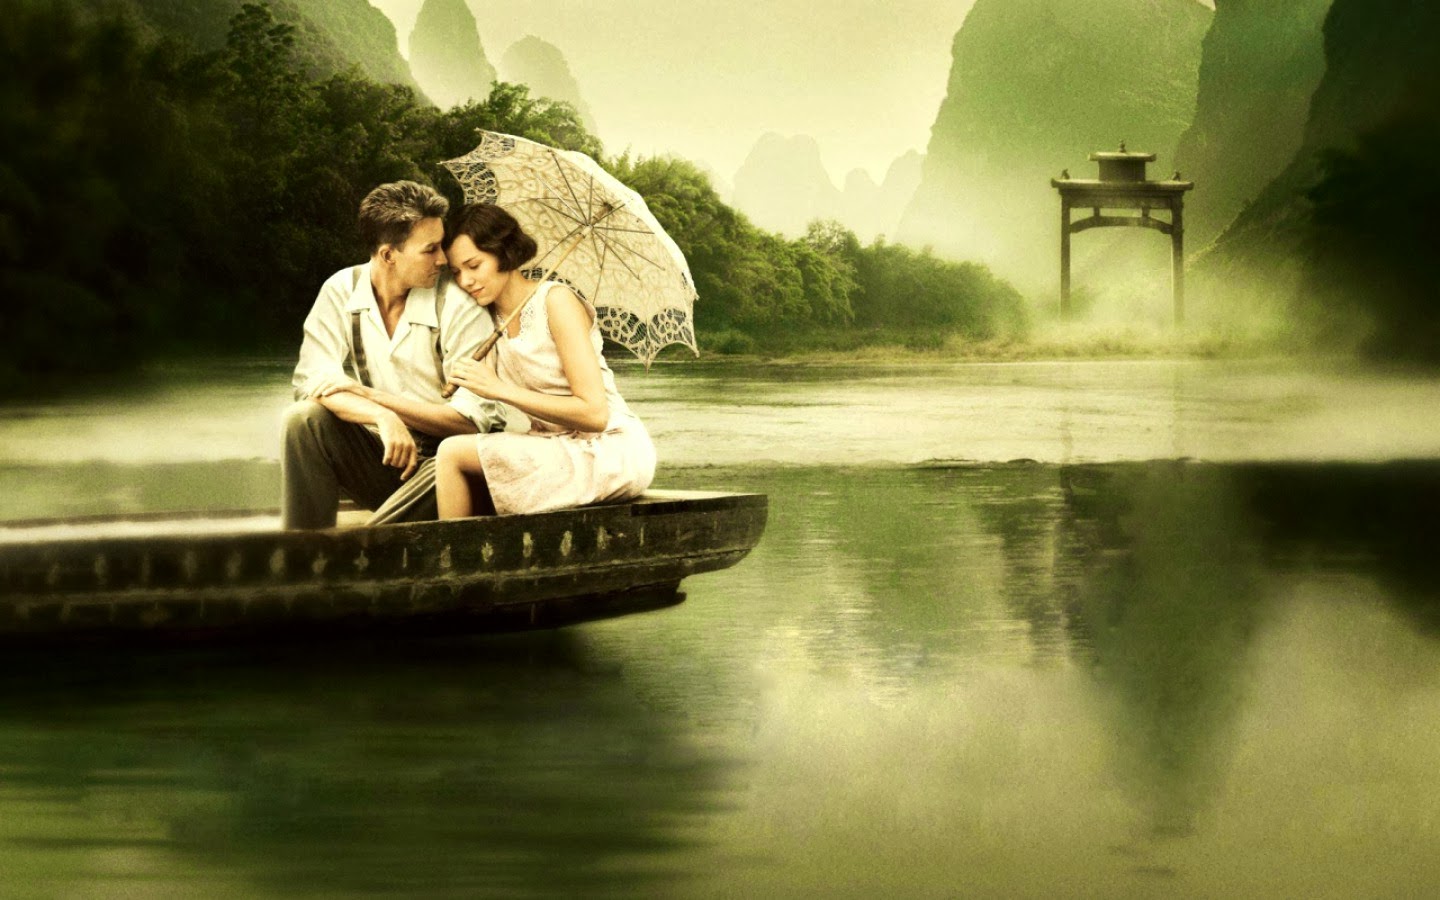 Romantic Couple HD Wallpaper and Image couple in boat